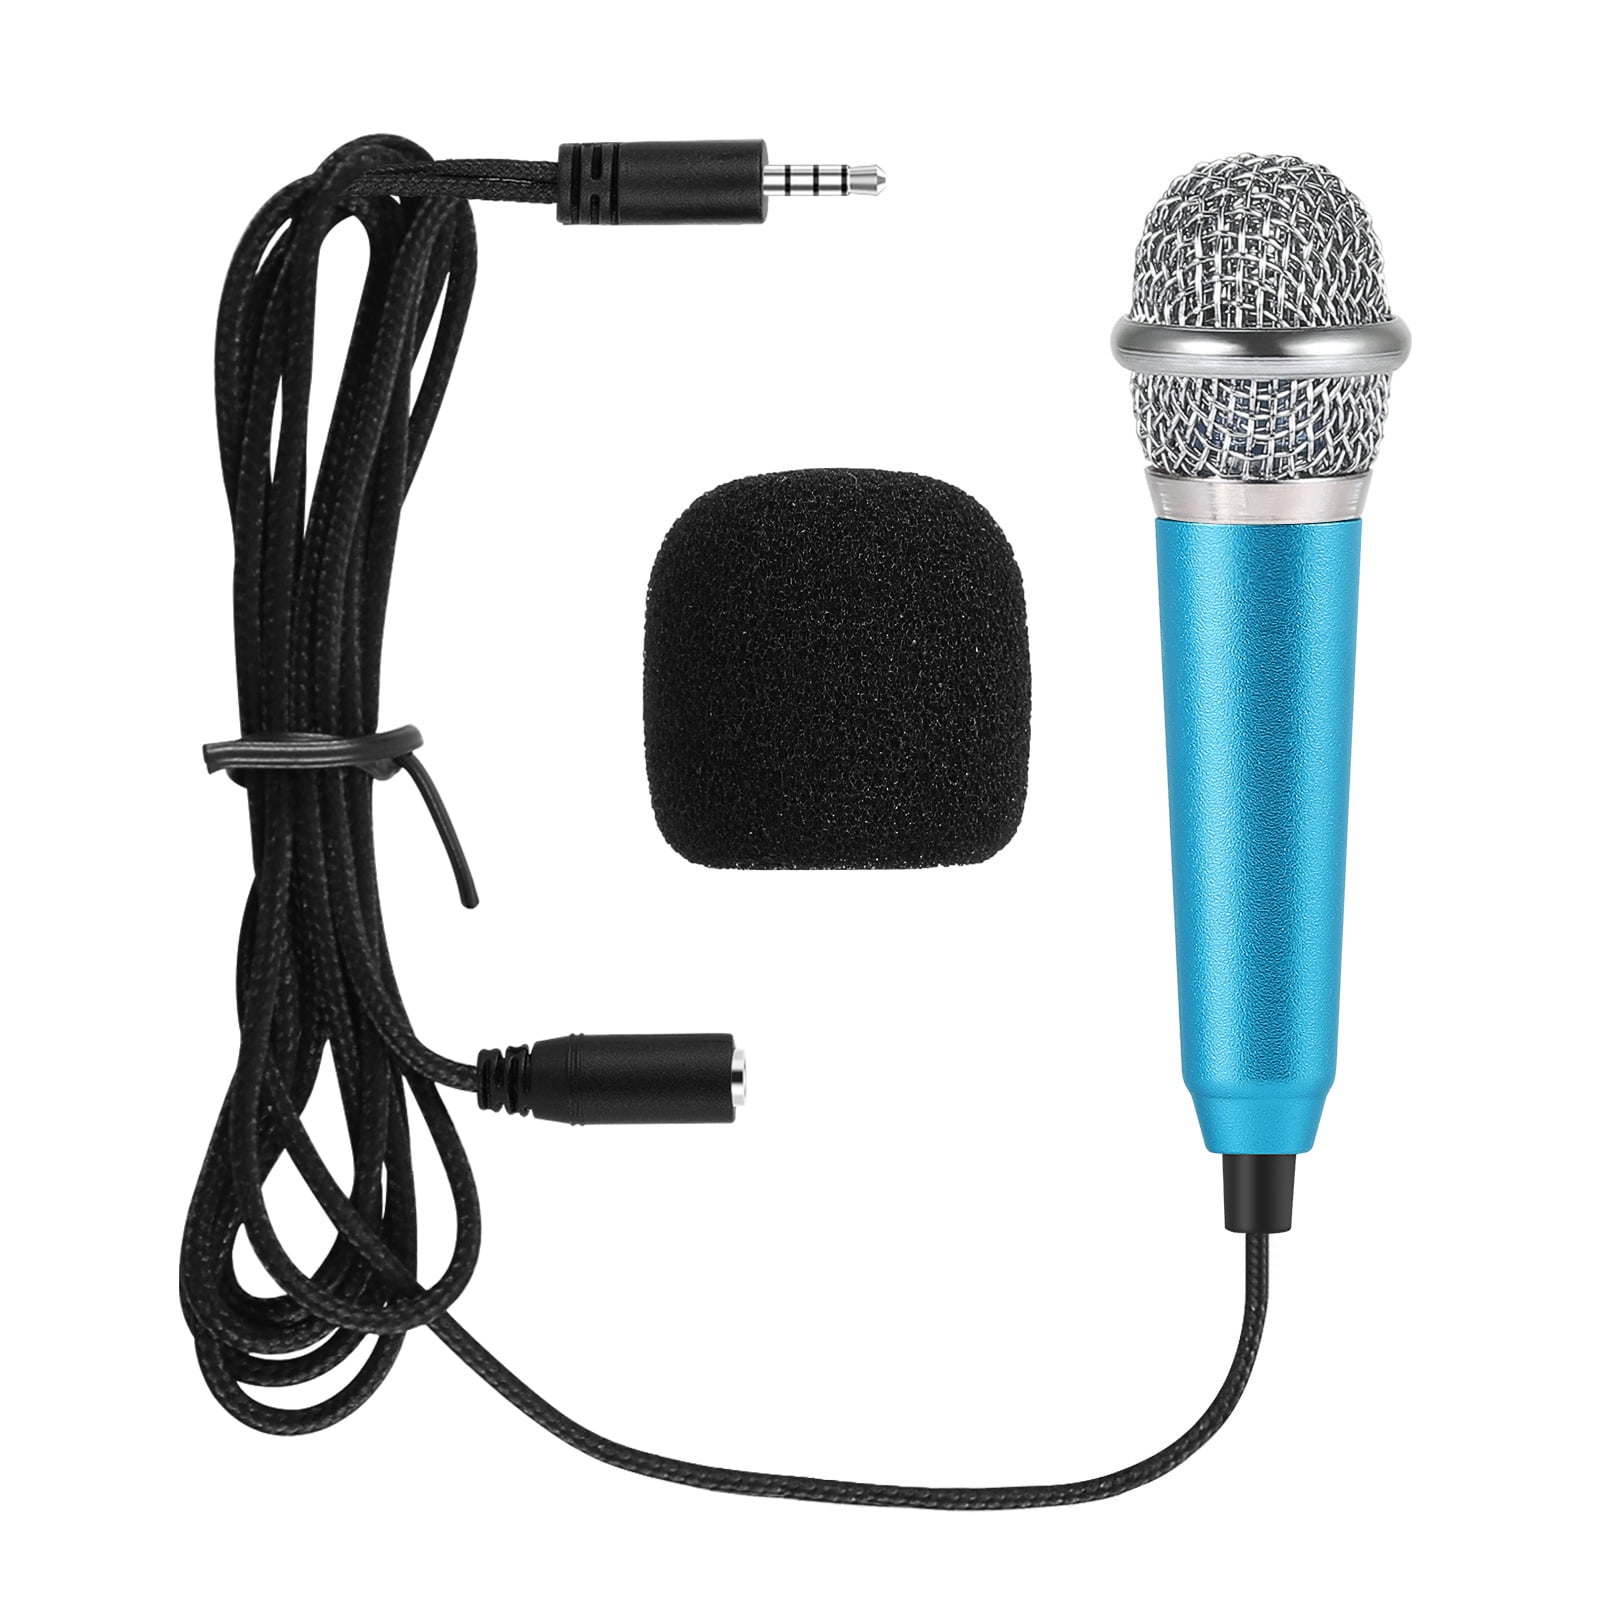 Universal Mini Microphone for Voice Recording,Chatting and Singing on Laptop Desktop Computer Tablet TV Karaoke Smart Phone Gold 